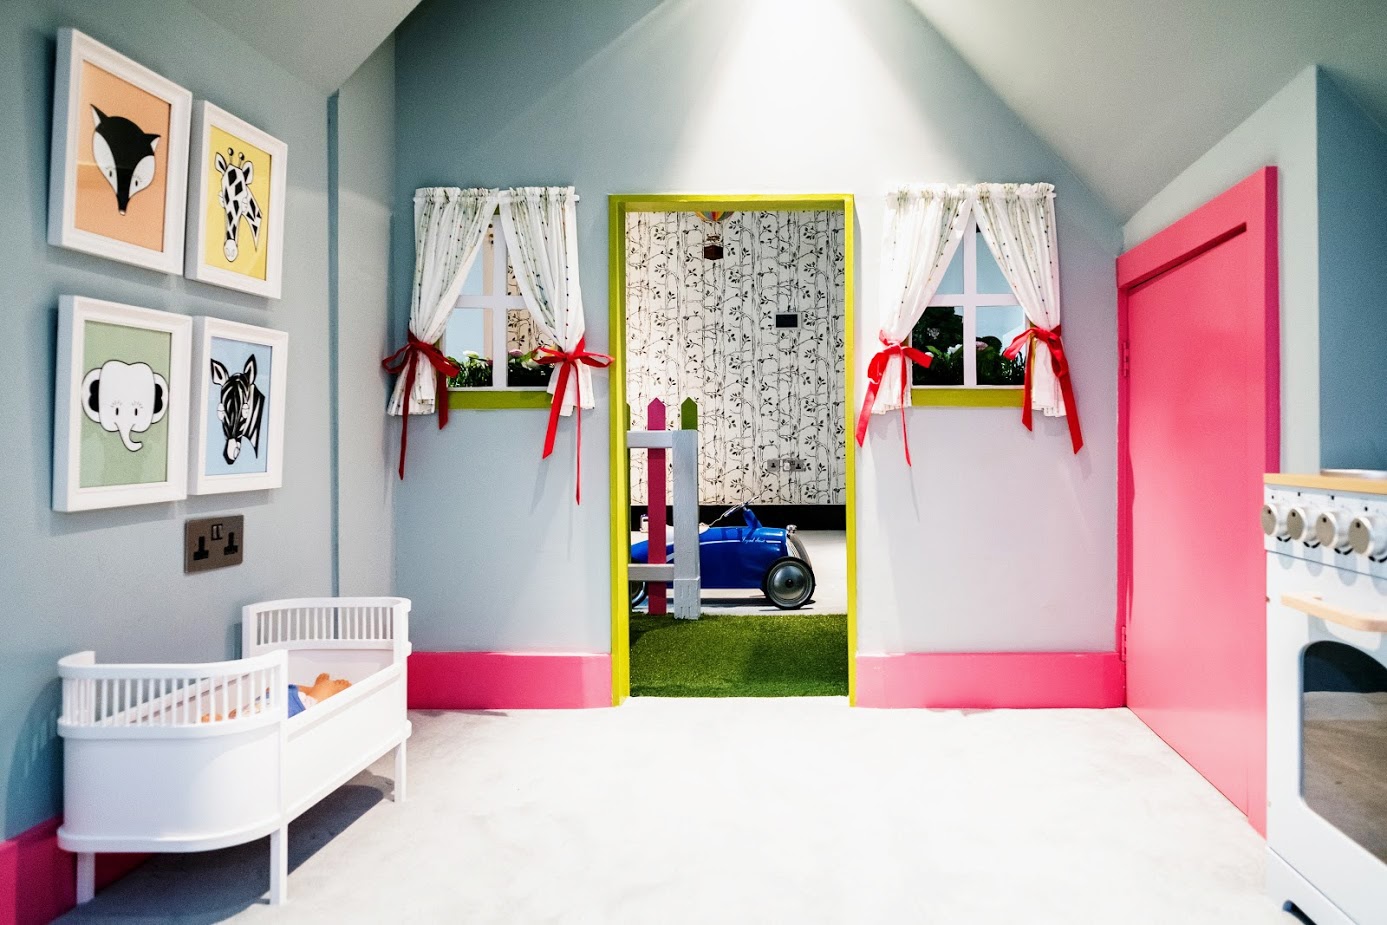 How to plan and design the perfect playroom